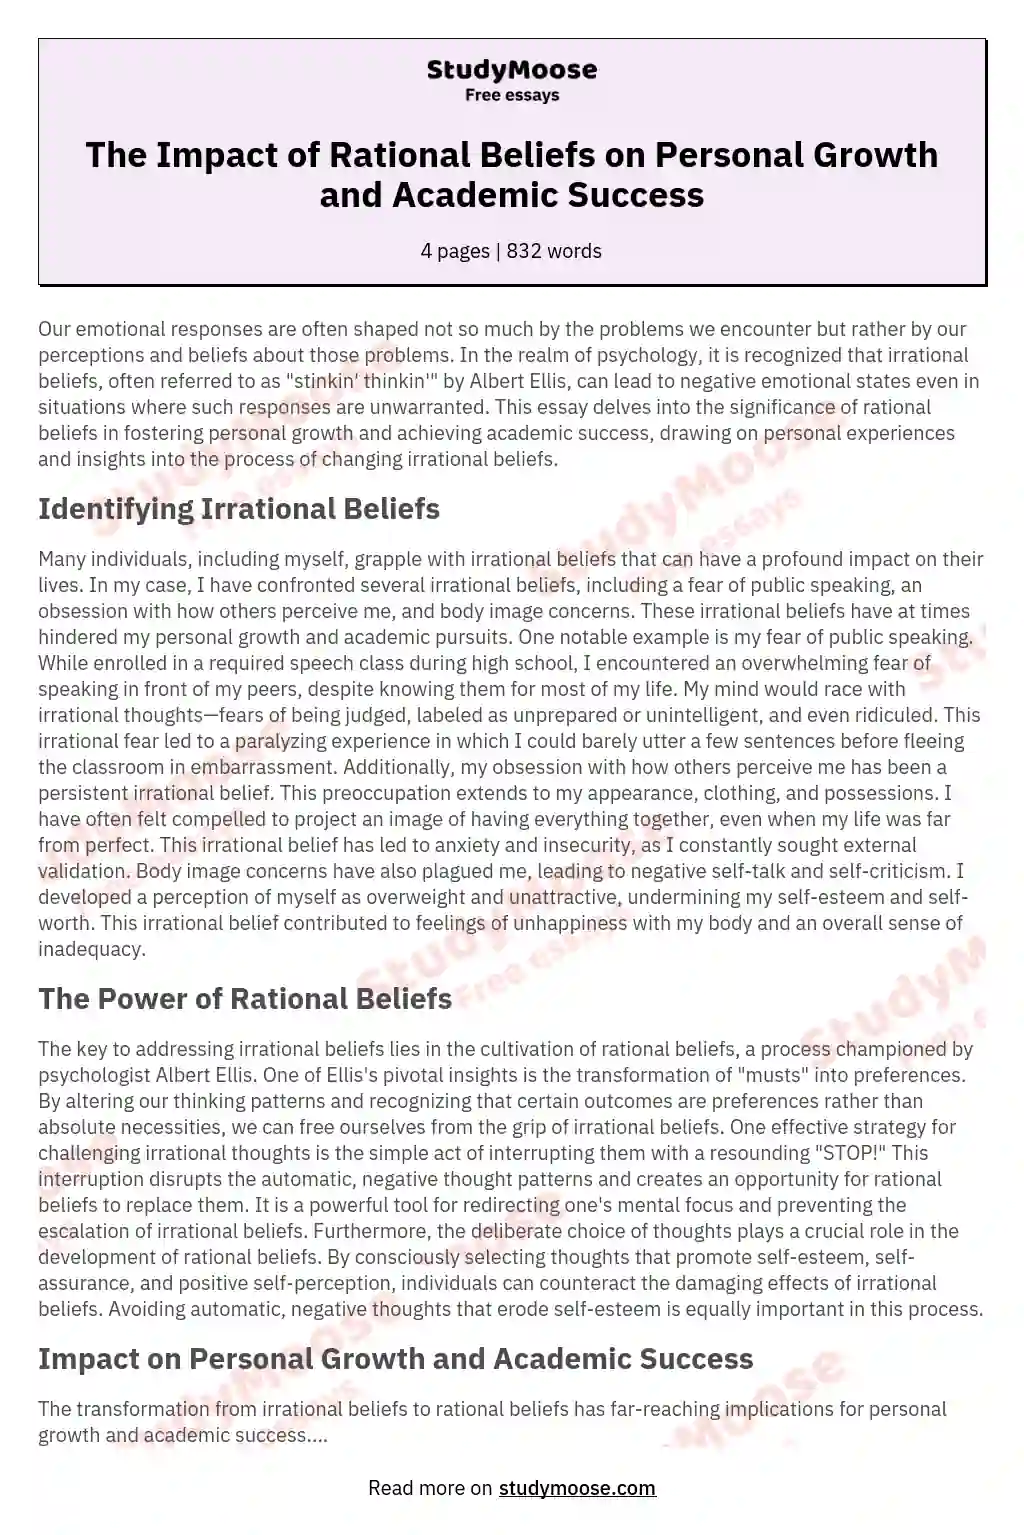 The Impact of Rational Beliefs on Personal Growth and Academic Success essay